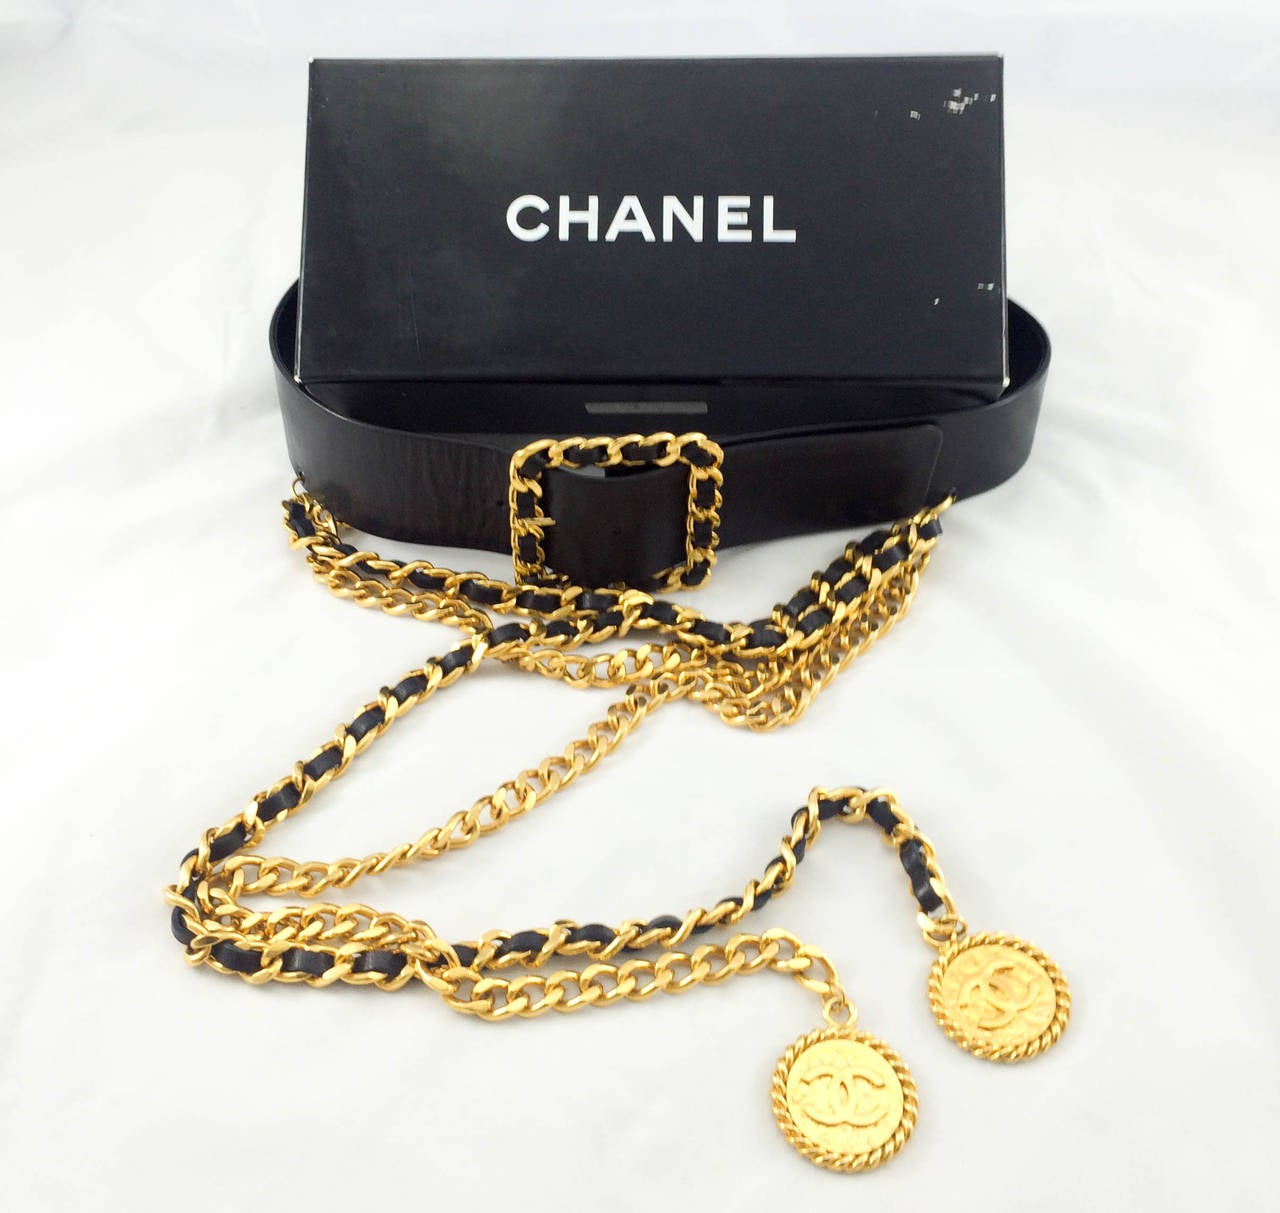 Stylish Vintage Chanel Belt. This super sexy Chanel belt is made of black leather and gold tone metal. Created by the super jewellery designer Victoire de Castellane, it features a fabulous chain embellishment on the front comprising of 2 gold tone